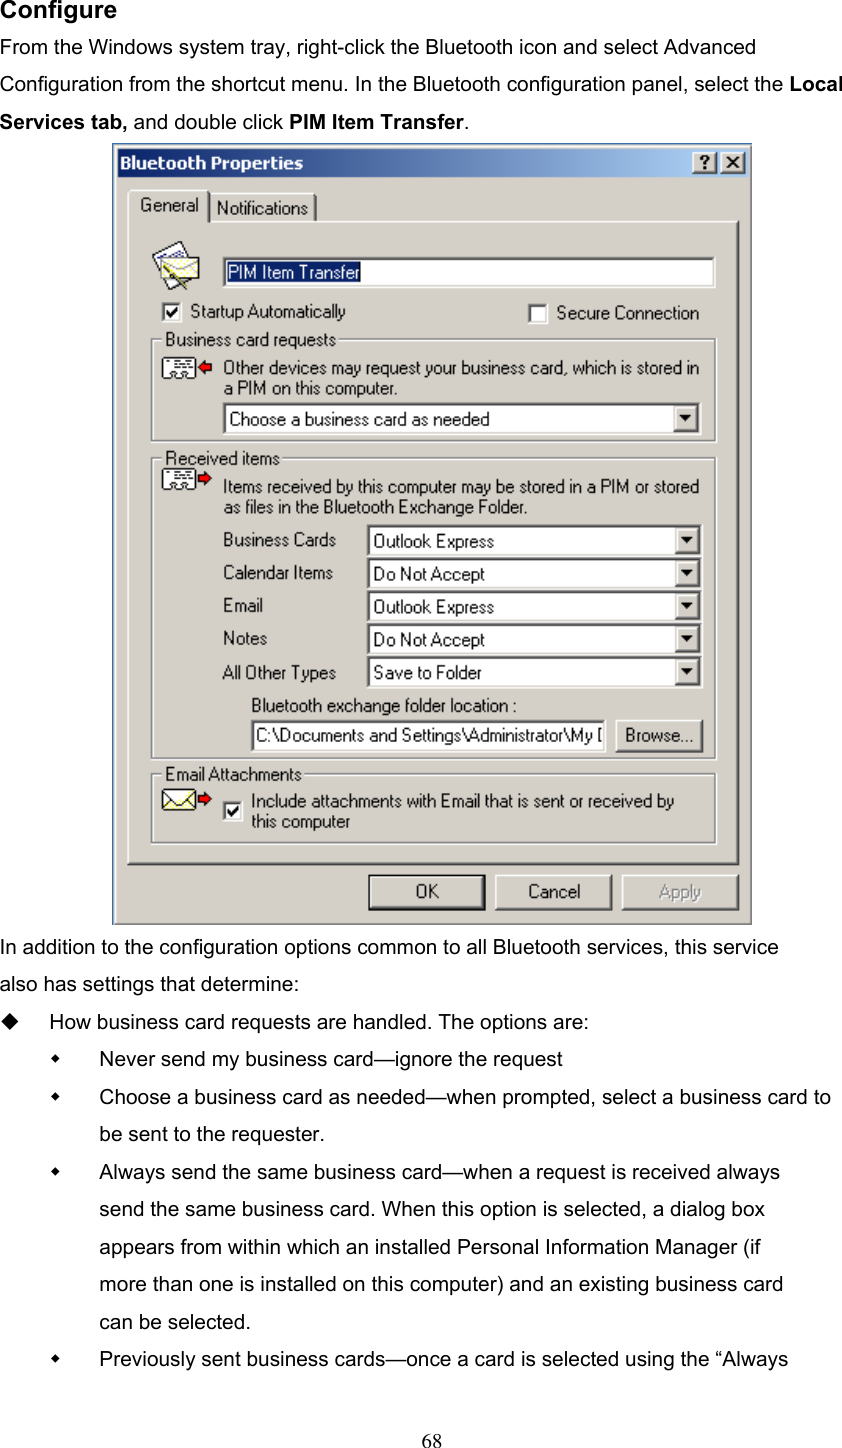  Configure From the Windows system tray, right-click the Bluetooth icon and select Advanced Configuration from the shortcut menu. In the Bluetooth configuration panel, select the Local Services tab, and double click PIM Item Transfer.  In addition to the configuration options common to all Bluetooth services, this service also has settings that determine:   How business card requests are handled. The options are:   Never send my business card—ignore the request   Choose a business card as needed—when prompted, select a business card to be sent to the requester.   Always send the same business card—when a request is received always send the same business card. When this option is selected, a dialog box appears from within which an installed Personal Information Manager (if more than one is installed on this computer) and an existing business card can be selected.   Previously sent business cards—once a card is selected using the “Always  68 